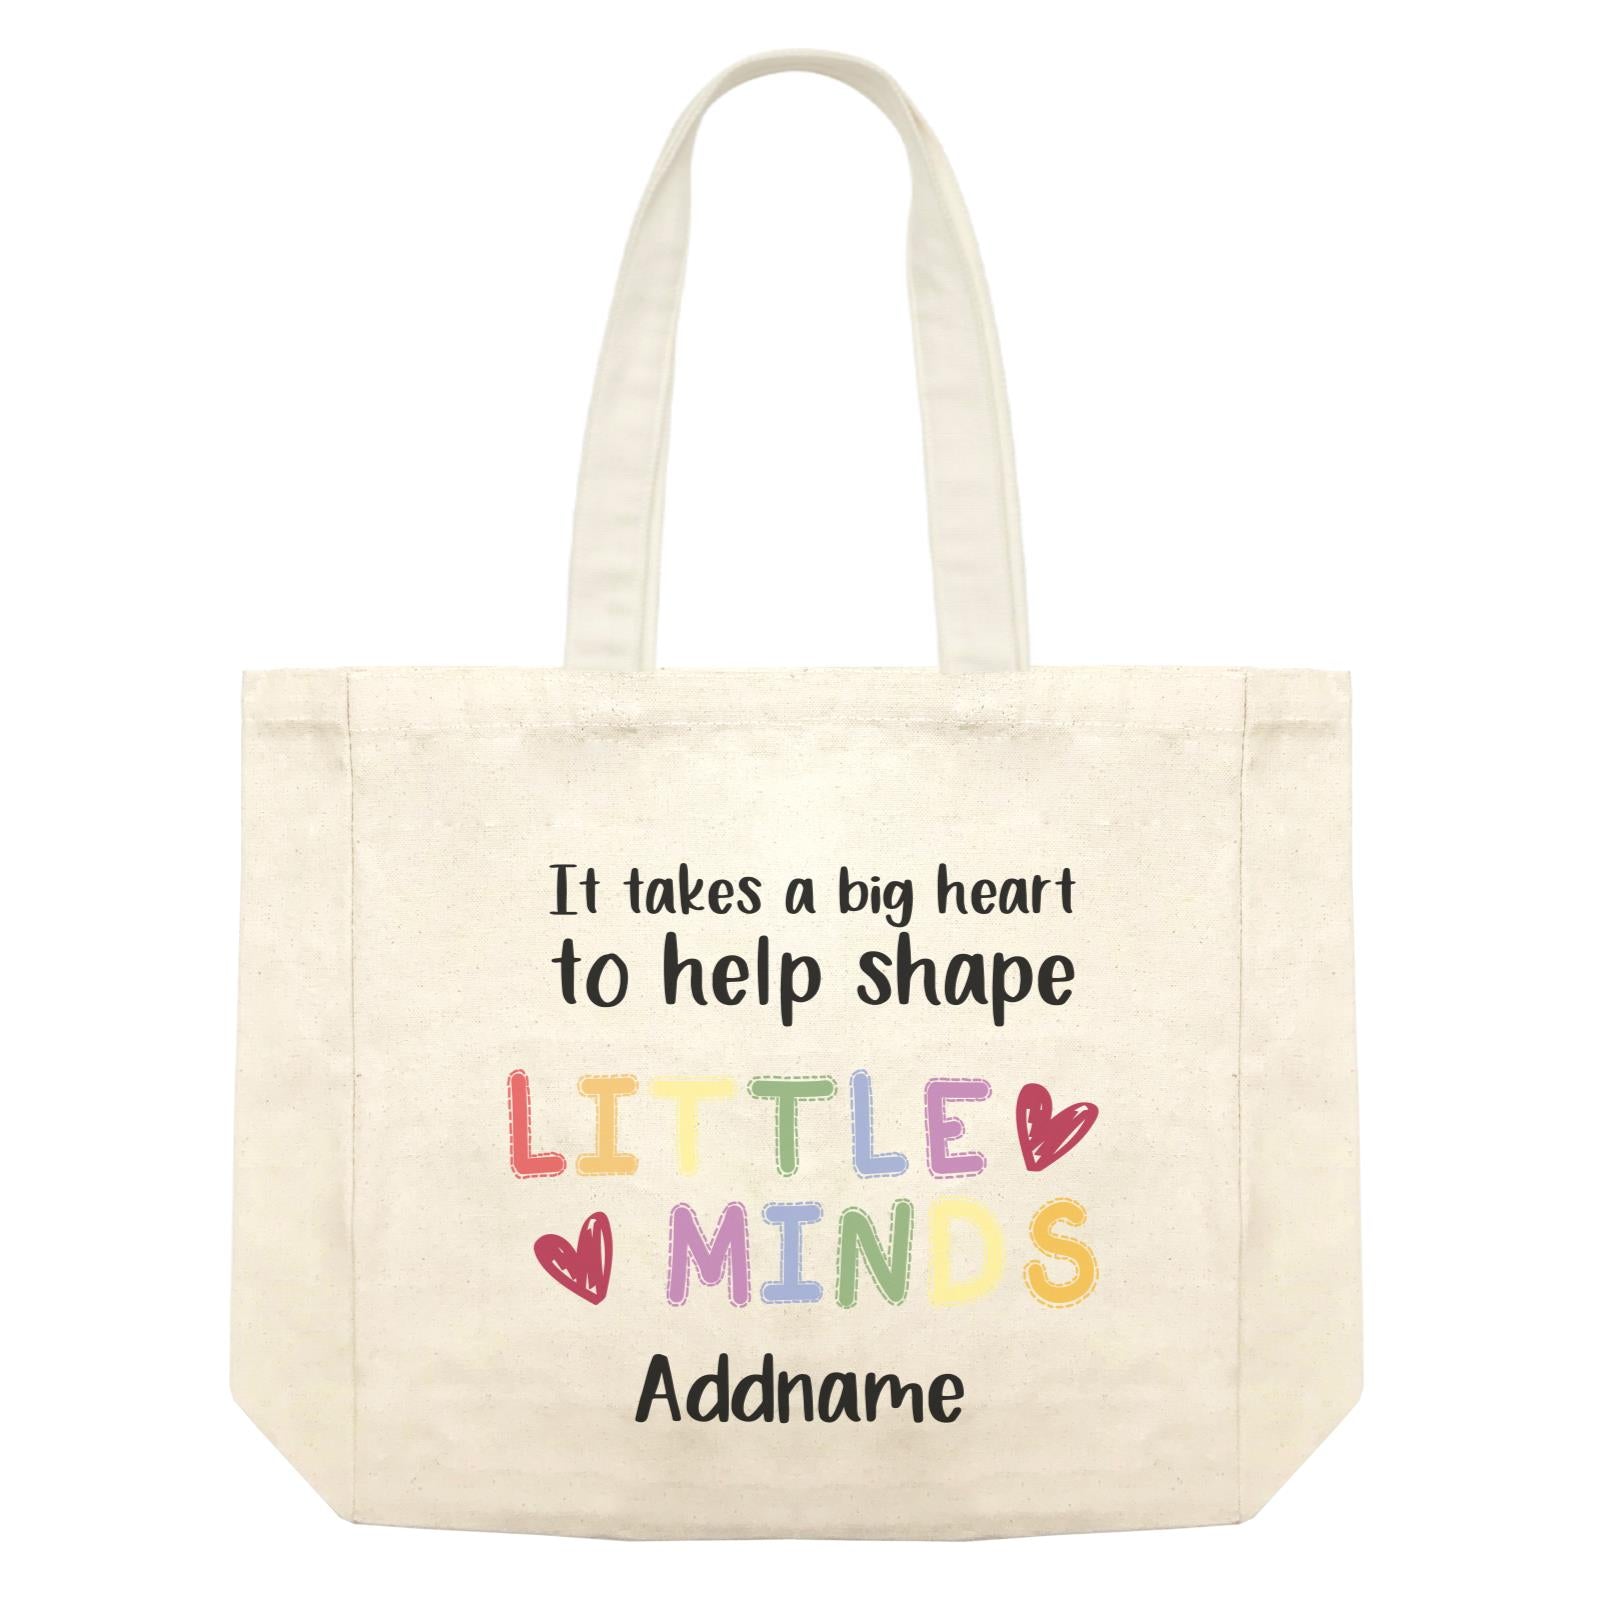 Teacher Quotes 2 It Takes A Big Heart To Help Shape Little Minds Addname Shopping Bag